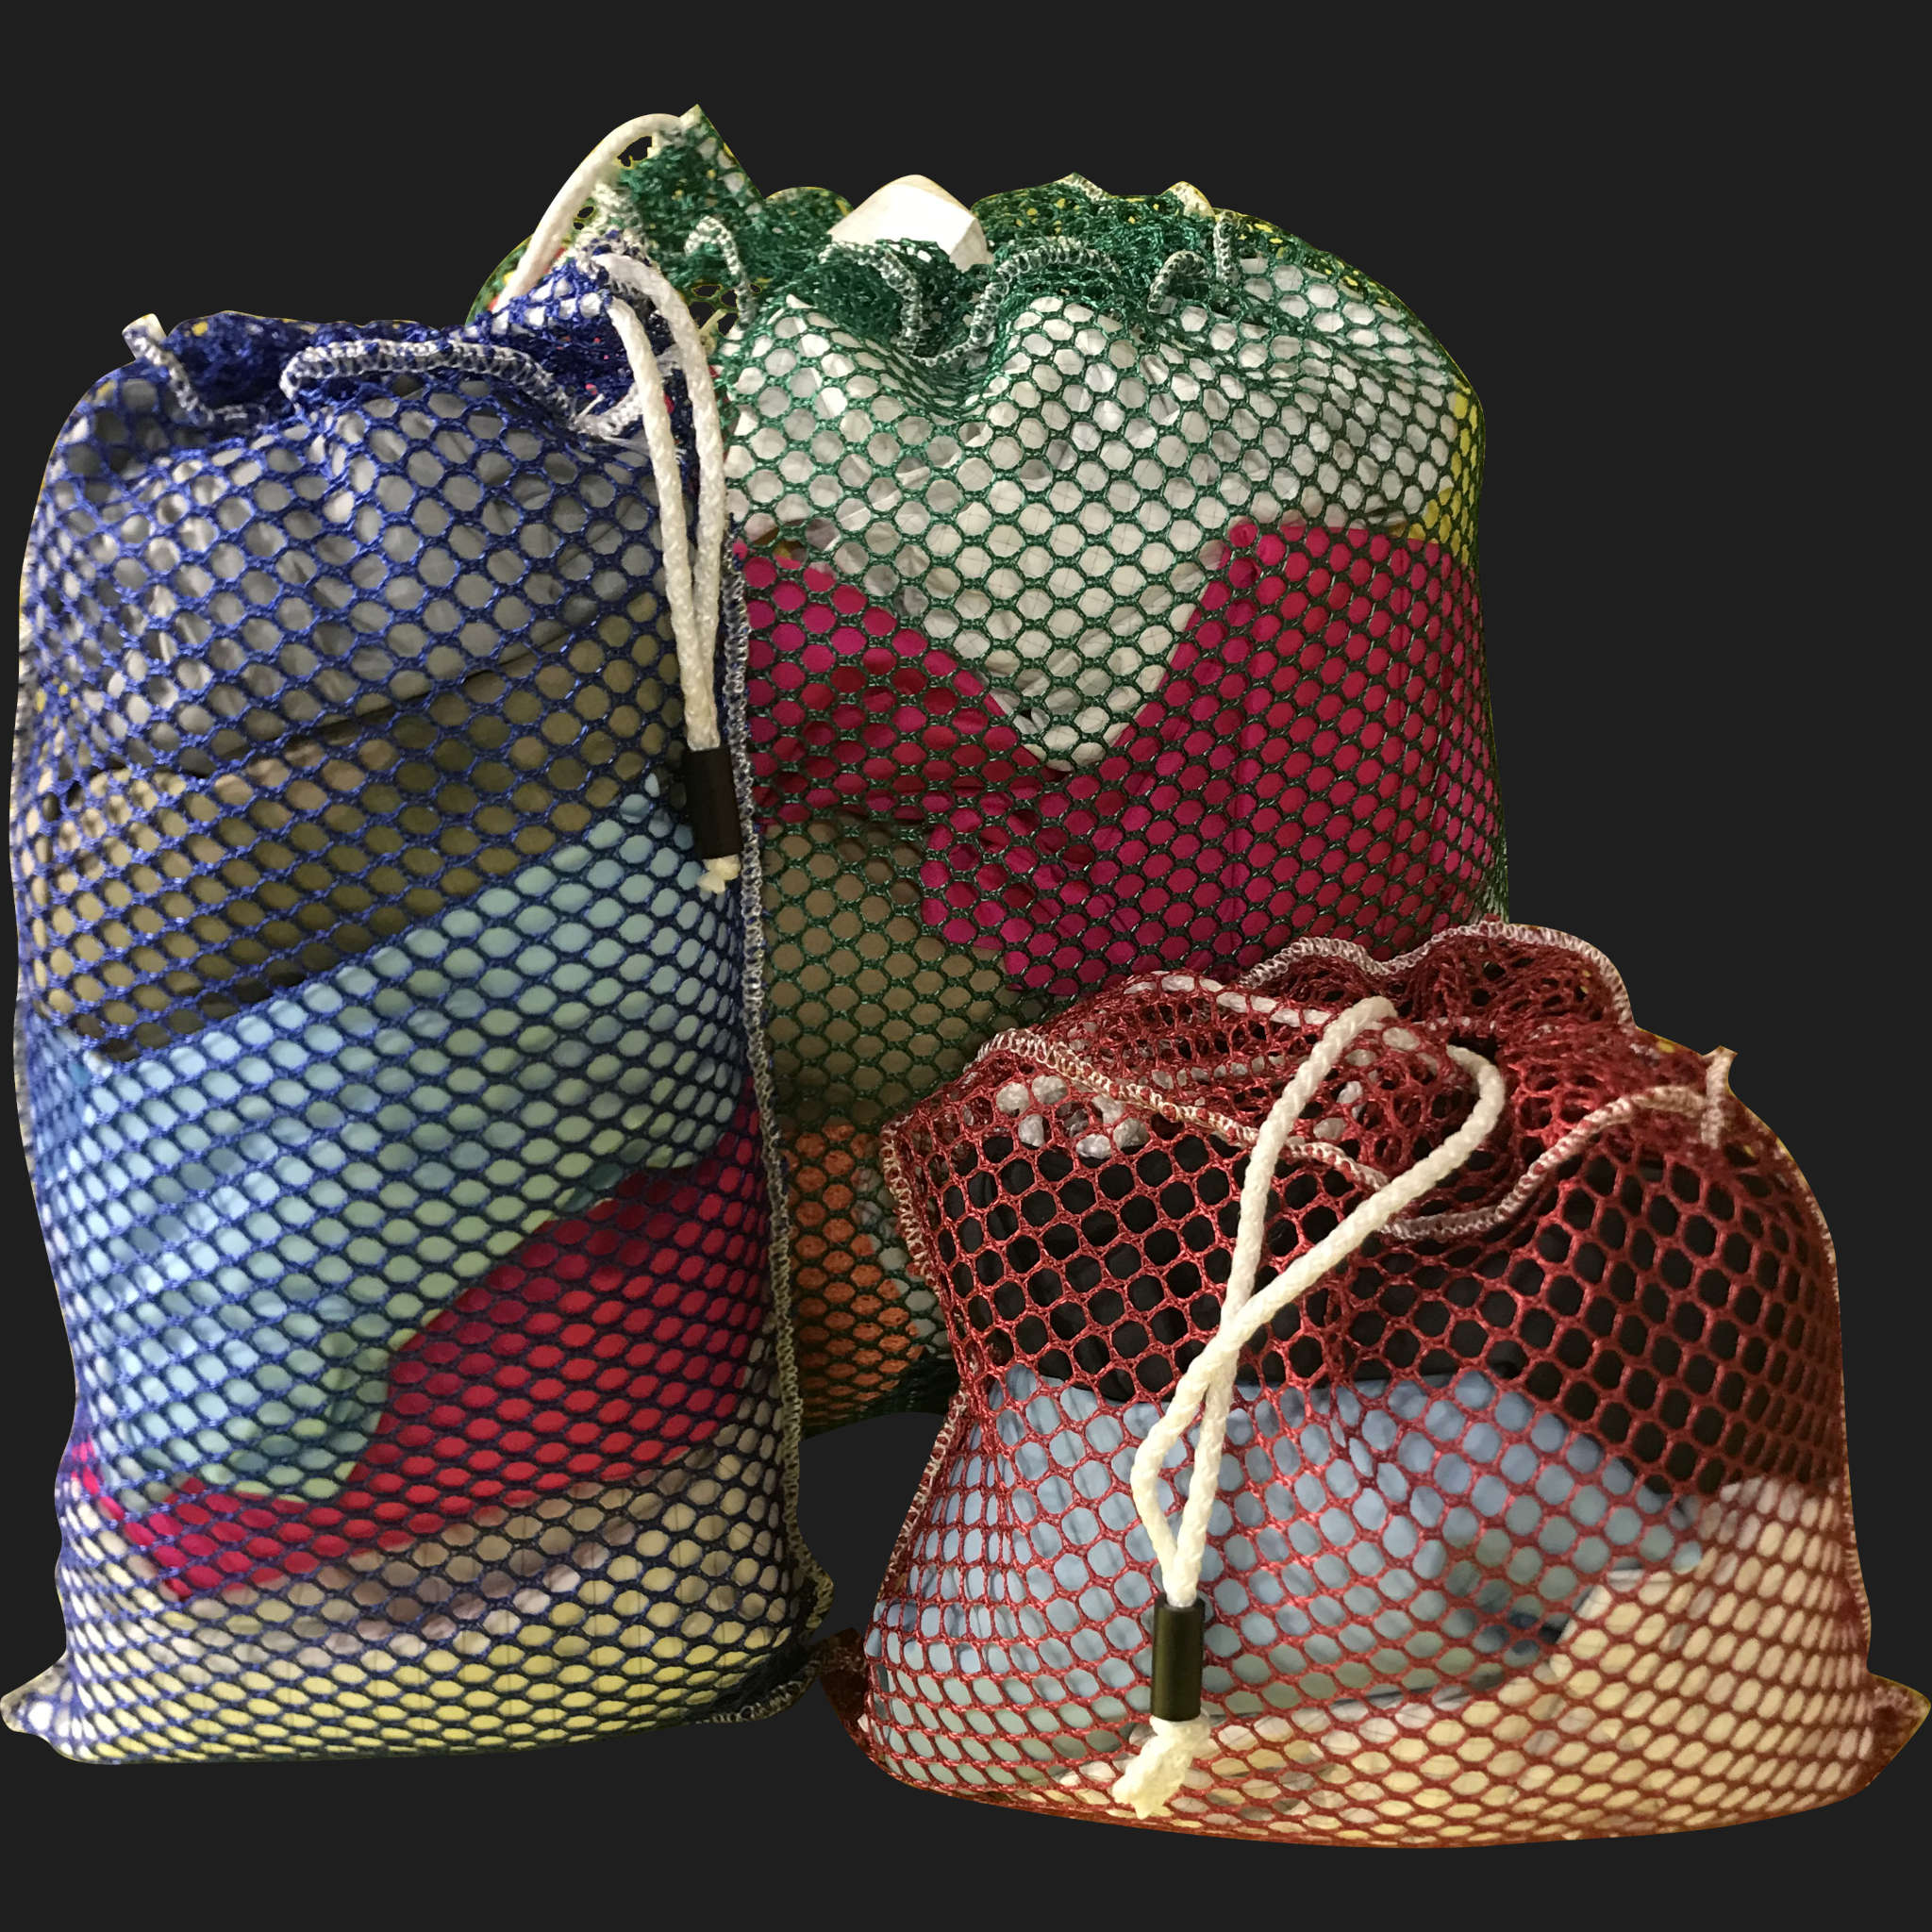 16" x 34" Customized Mesh-Net-Laundry Bags Heavy Duty with Cord and barrellock closure